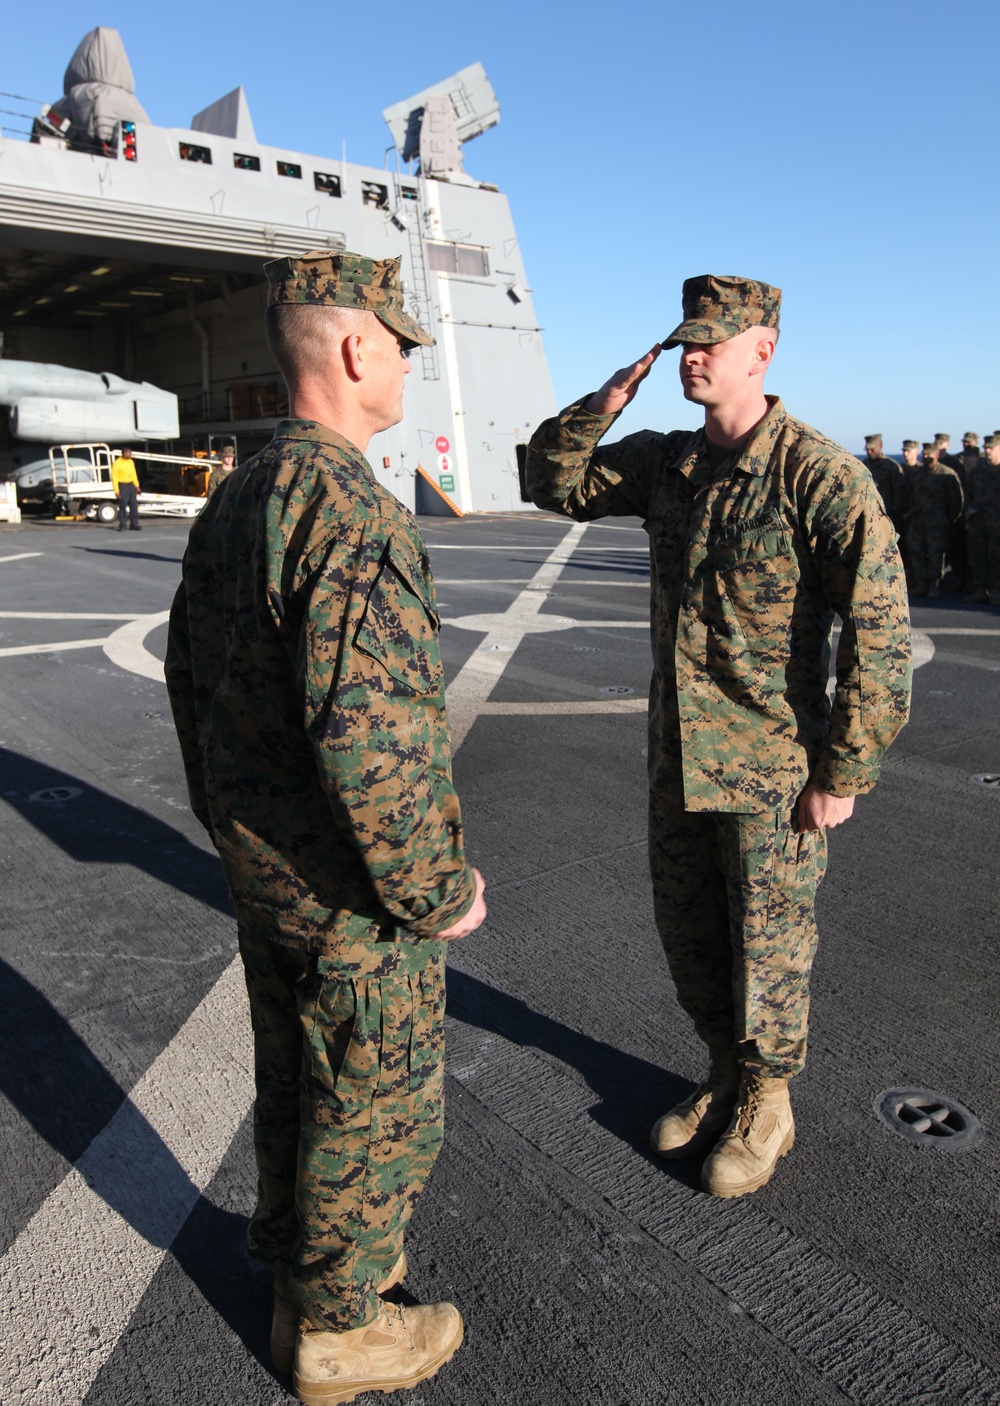 CLB 22 awards excellence aboard USS Mesa Verde